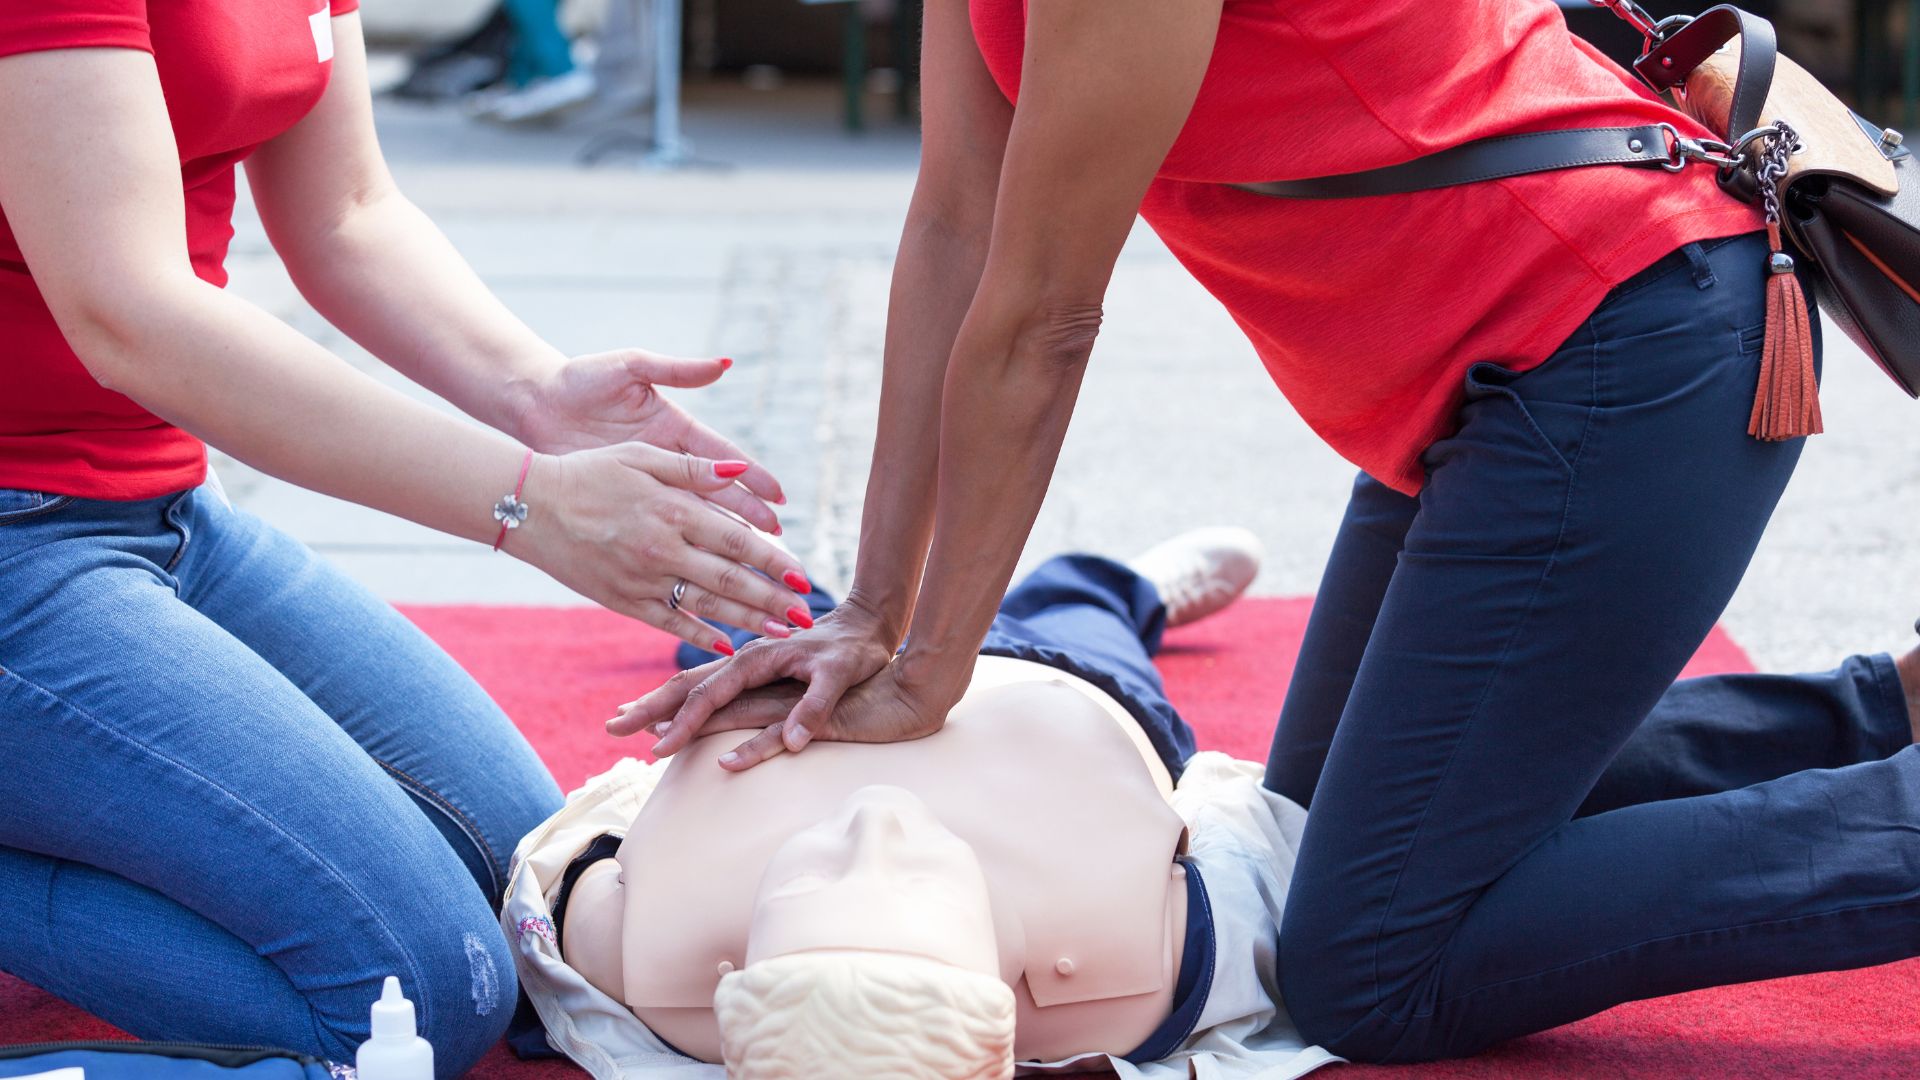 Image of CPR training